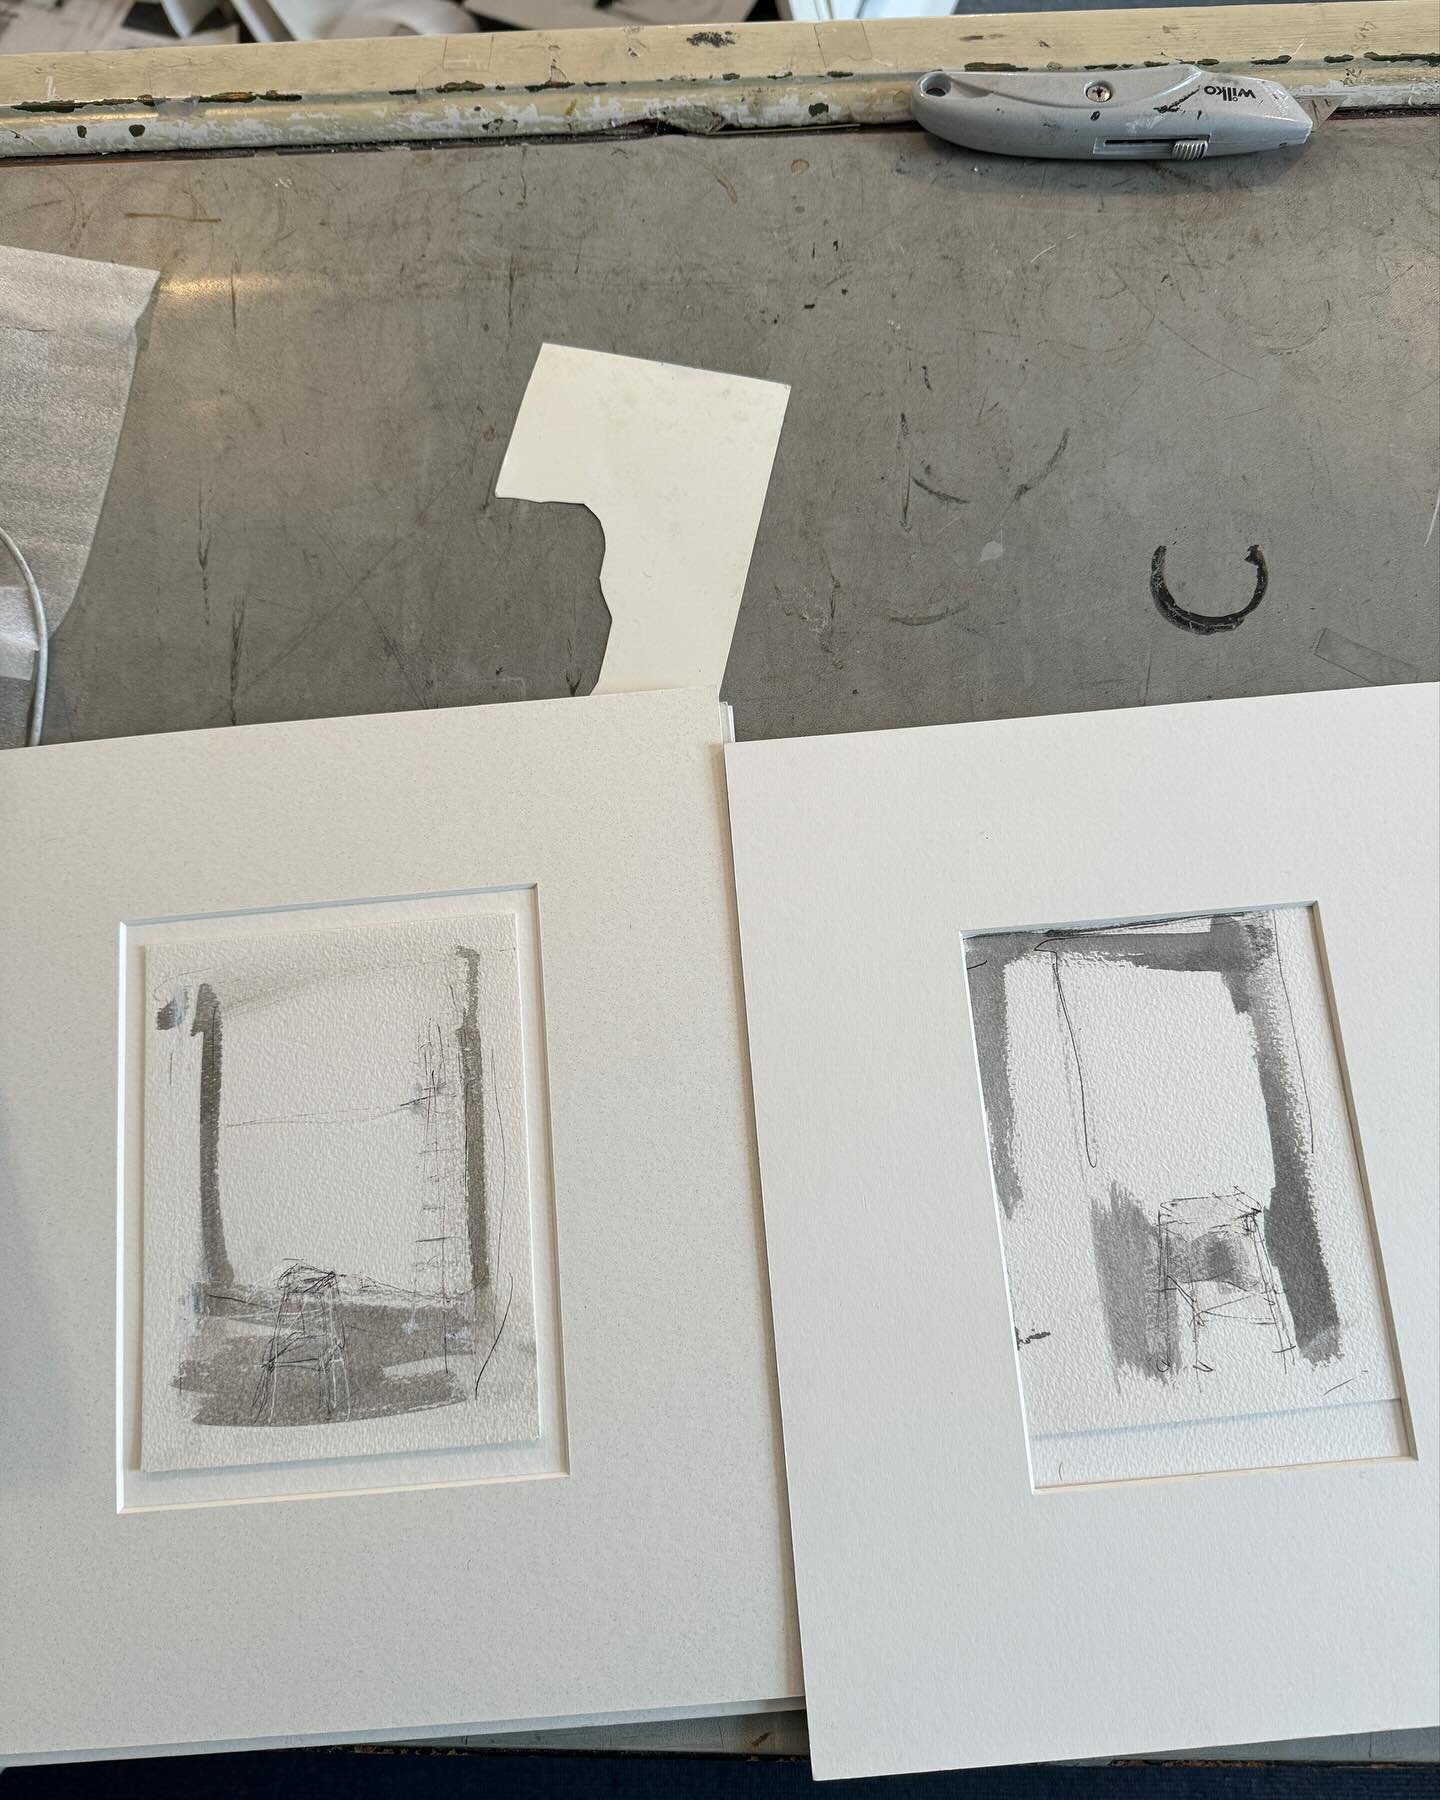 Last week I had the pleasure and privilege of visiting gallery artist Lydia Kiernan in her studio to choose work for her show  at The Table in August and here are some of the selected pieces &hellip;
.
.
#lydiakiernan #galleryartist #choosingthework 